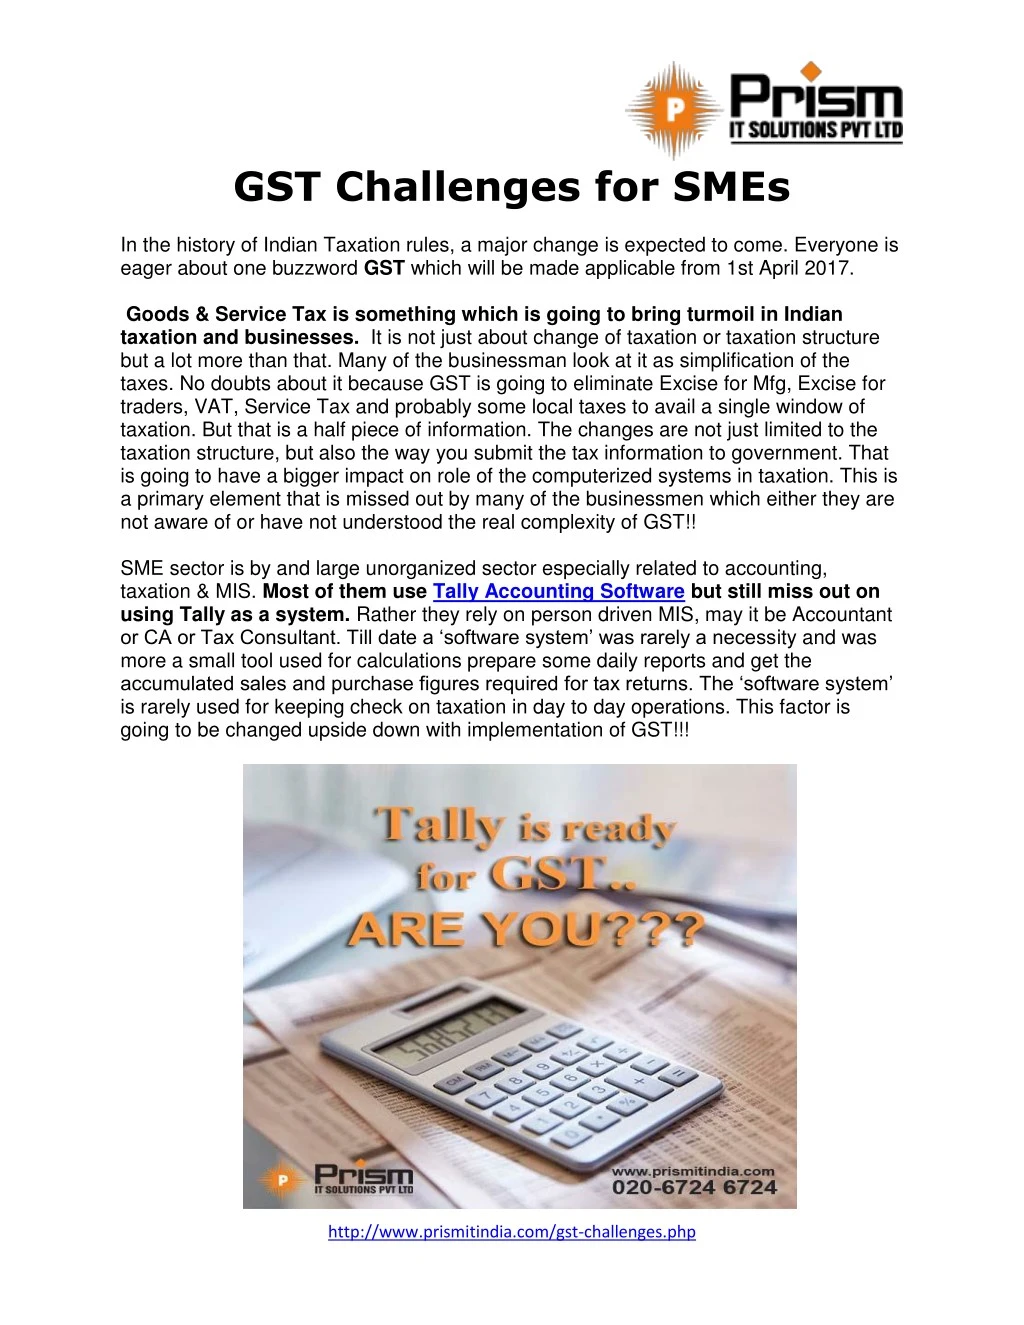 gst challenges for smes